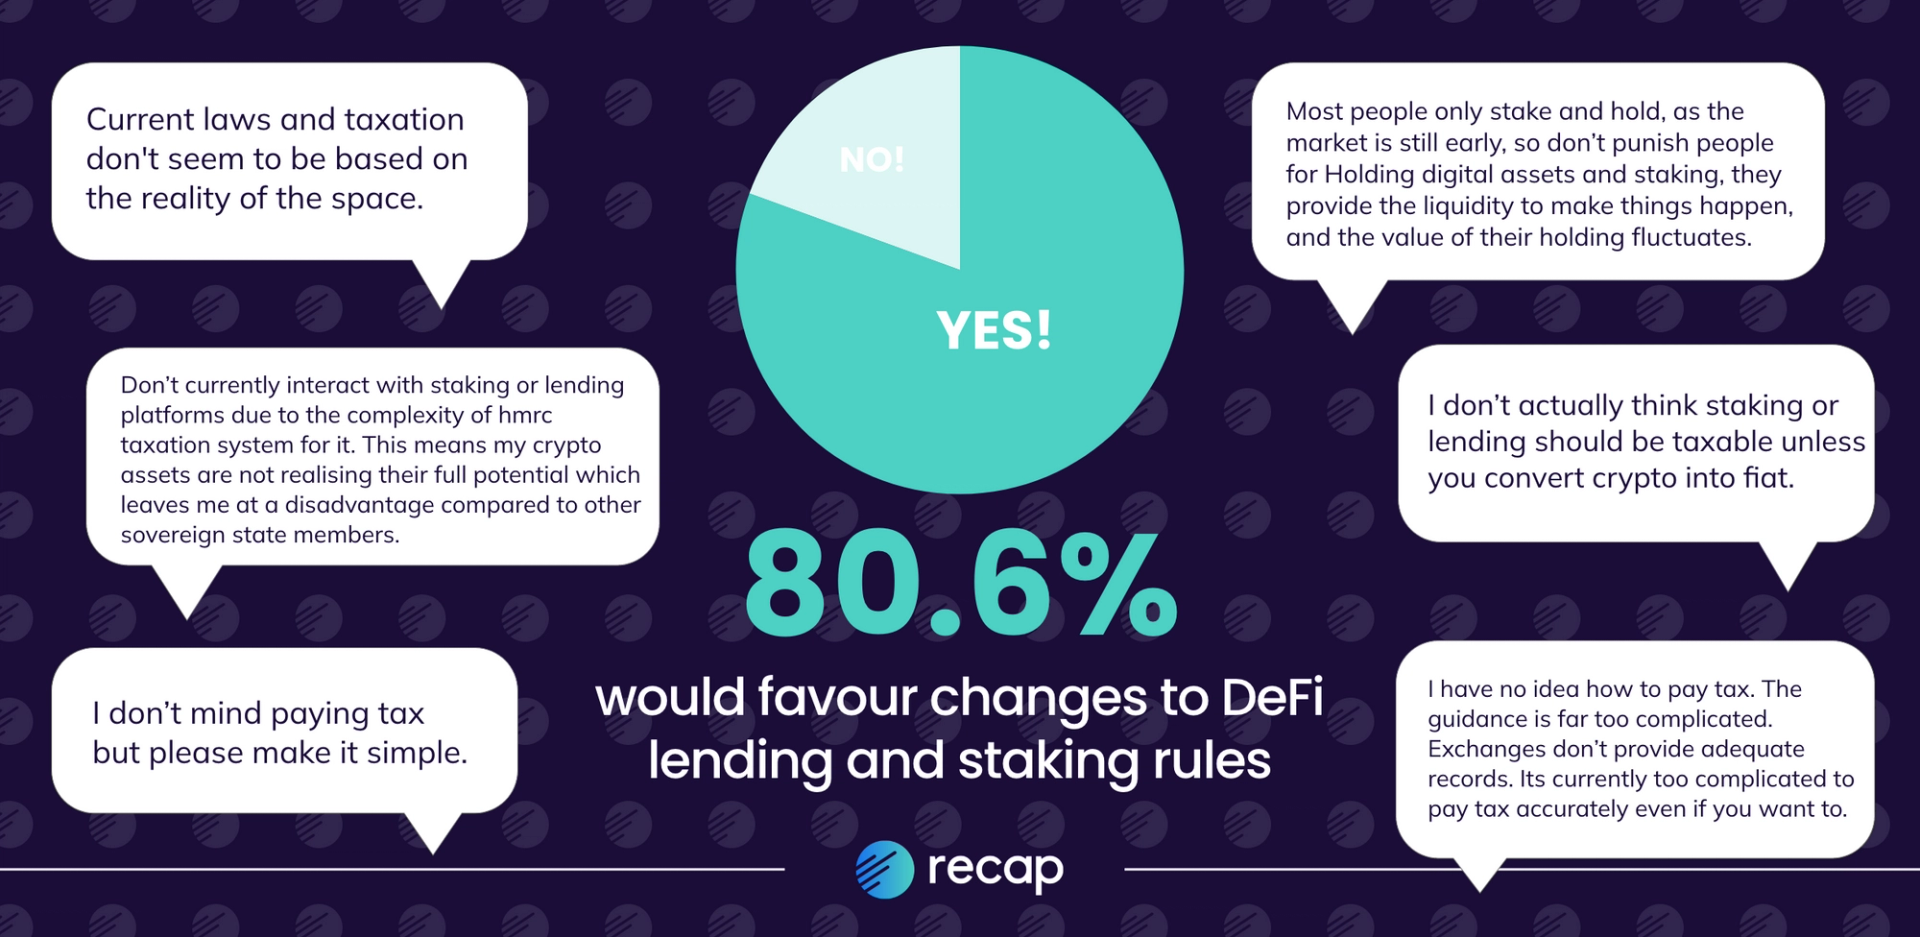 Infographic of comments: 80.6% would favour changes to DeFi lending and staking rules